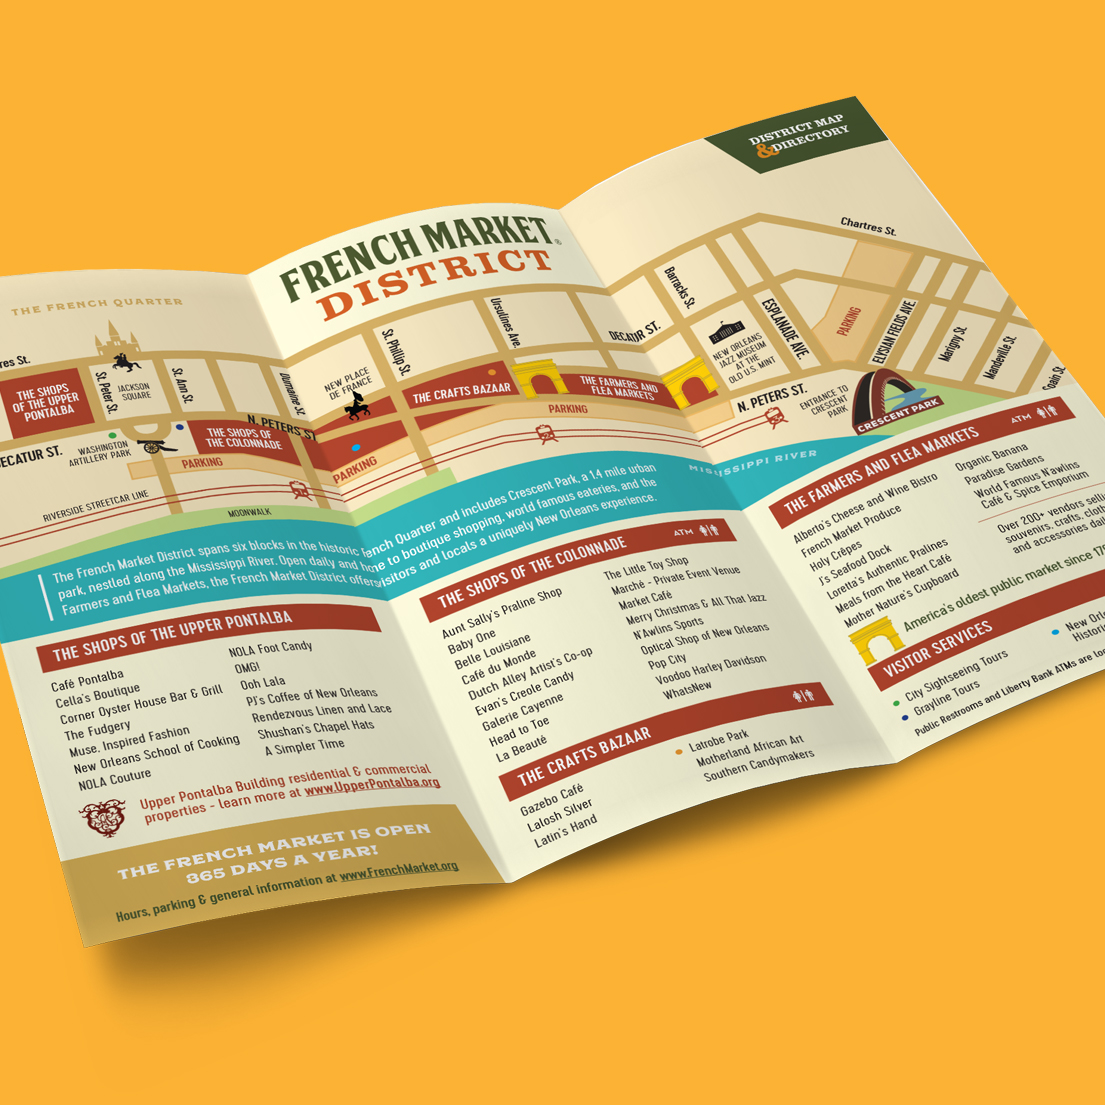 French Market District brochure